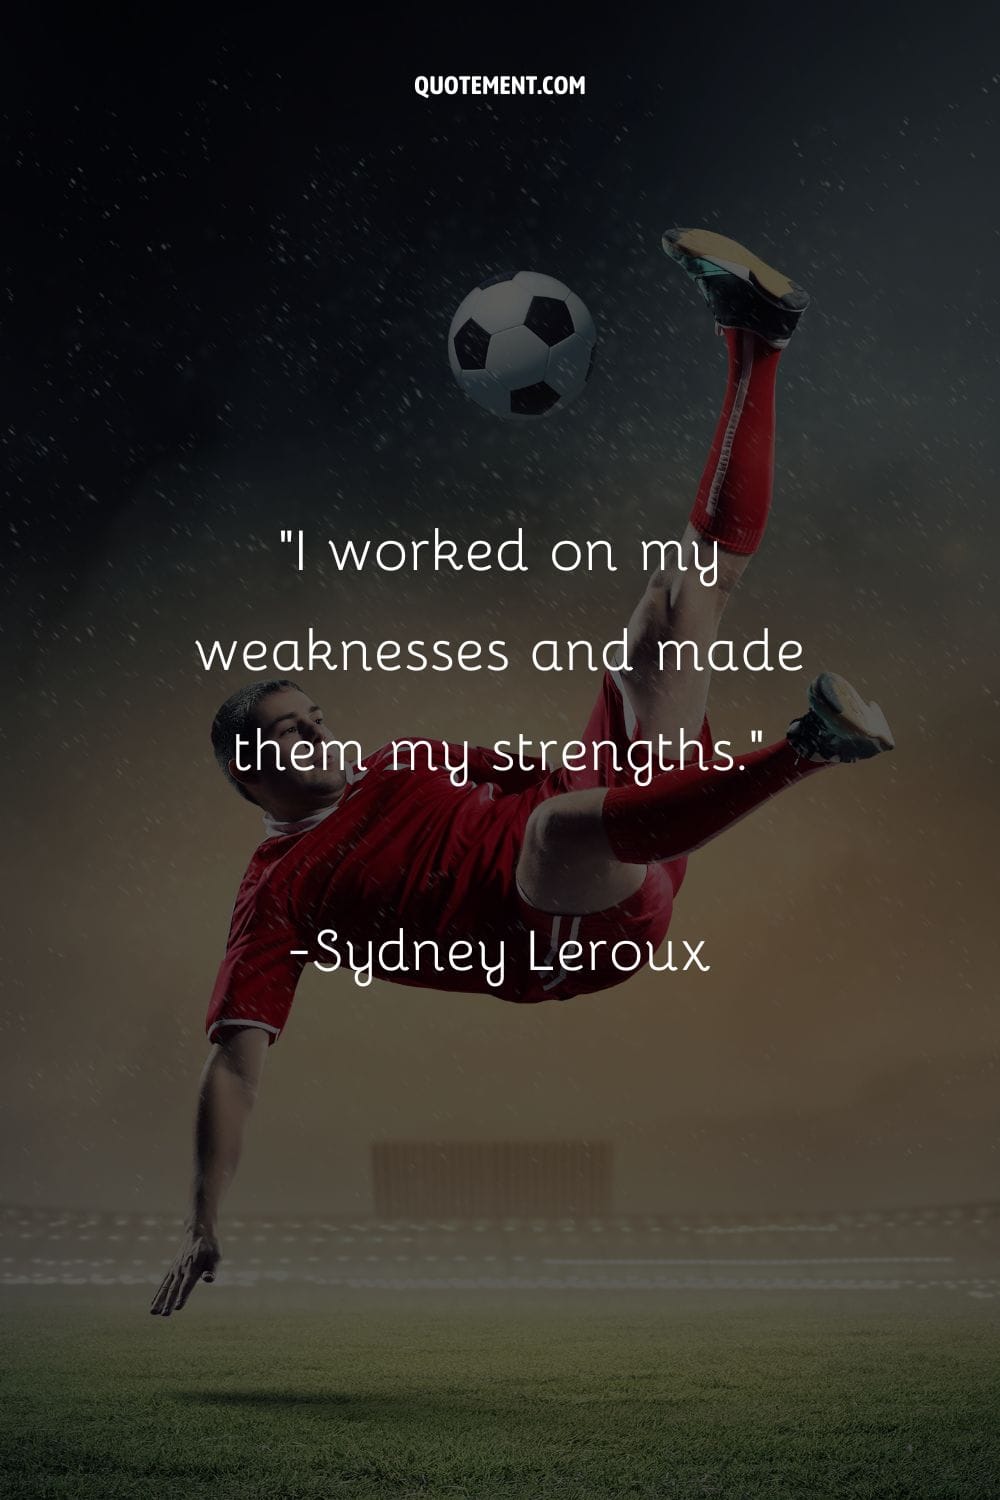 Sensational airborne move by a soccer player representing soccer winning quote